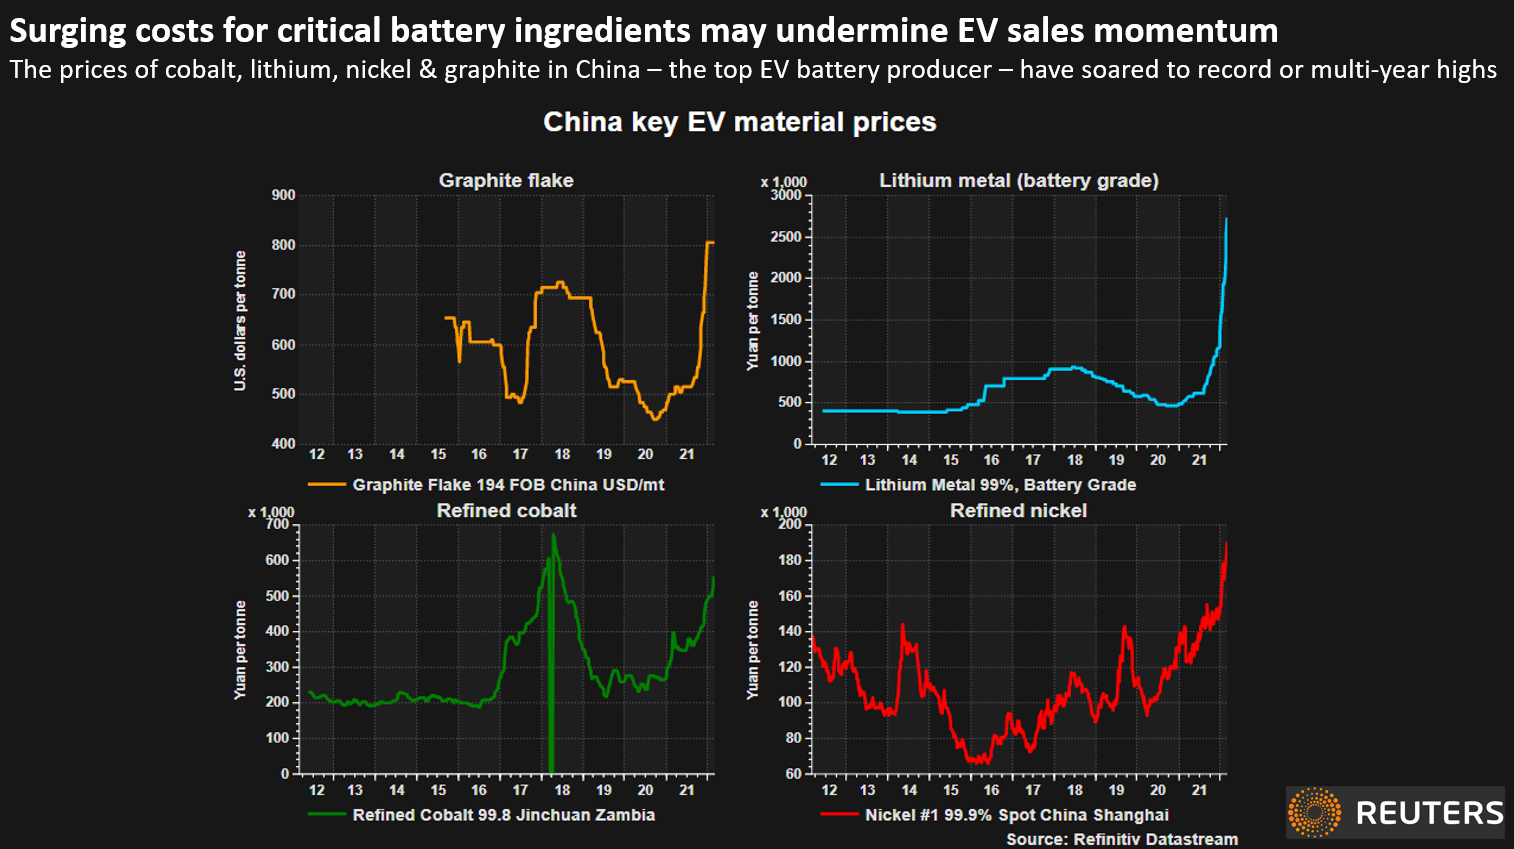 Surging costs for critical battery ingredients may undermine EV sales momentum